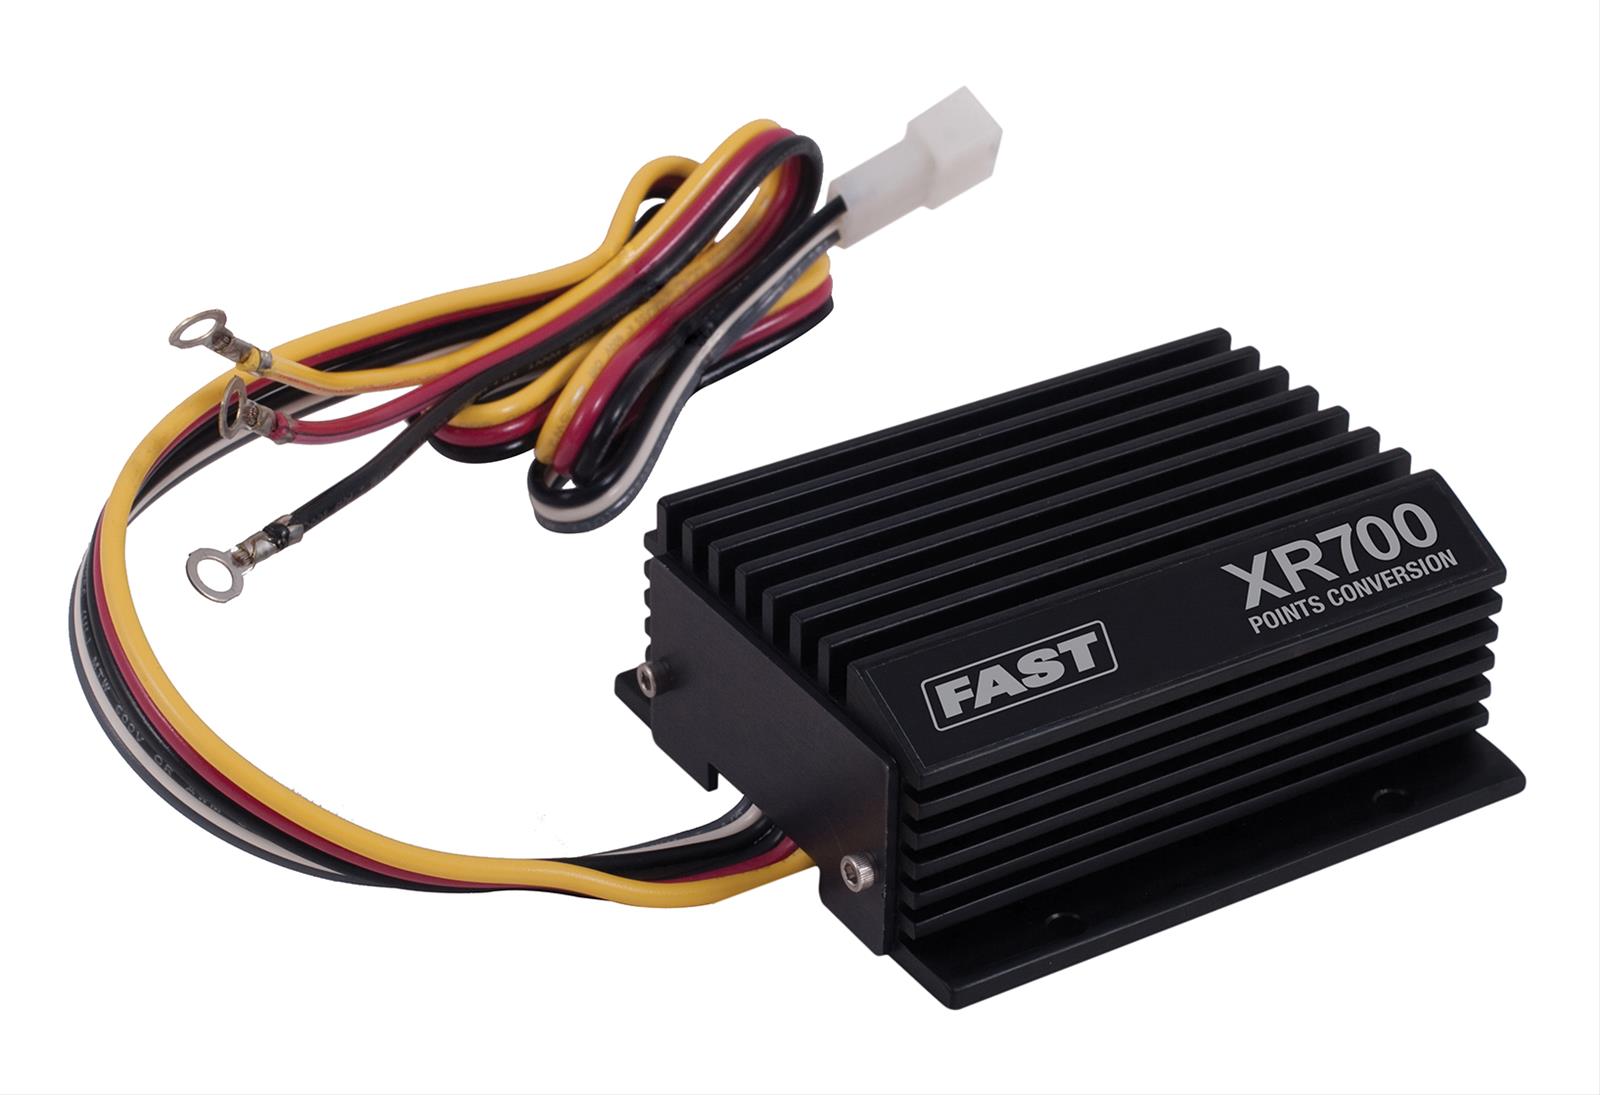 FAST XR700 Points-To-Electronic Ignition Conversion Kit For Import And Universal 4, 6 And 8 Cylinder Applications